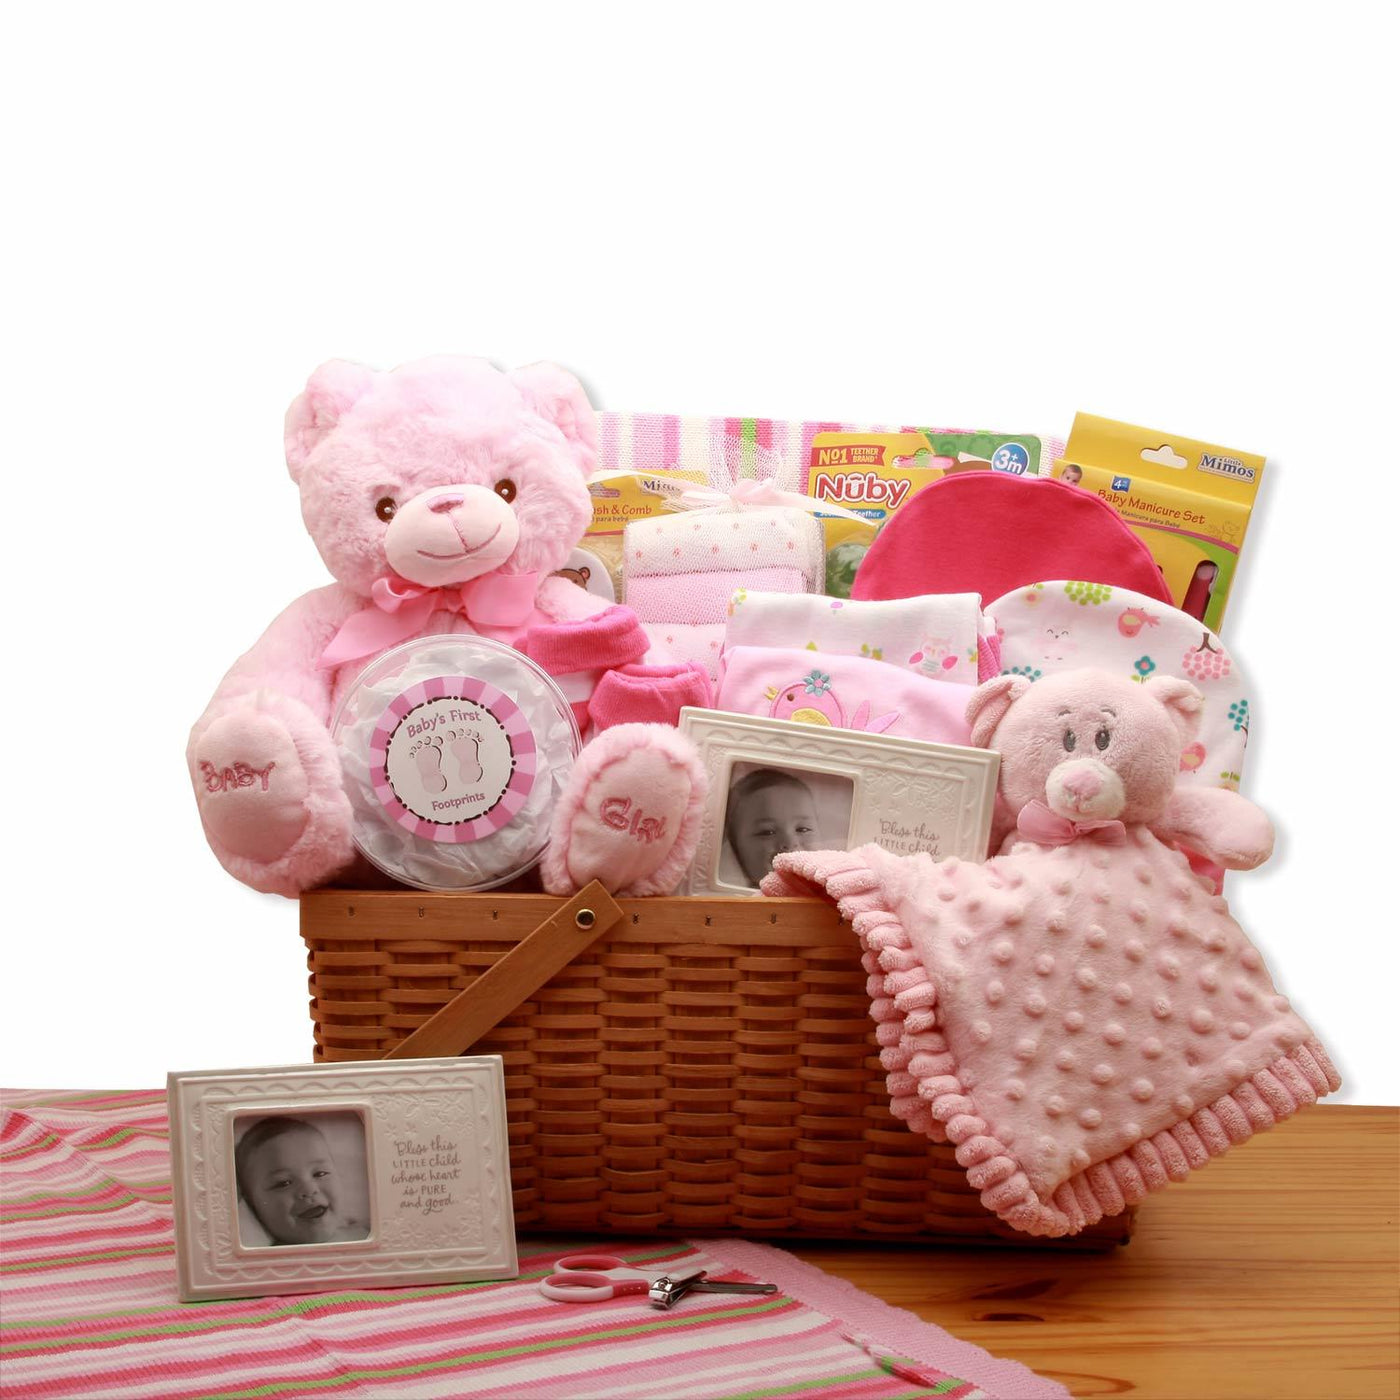 My First Teddy Bear Baby Gift Basket - Pink